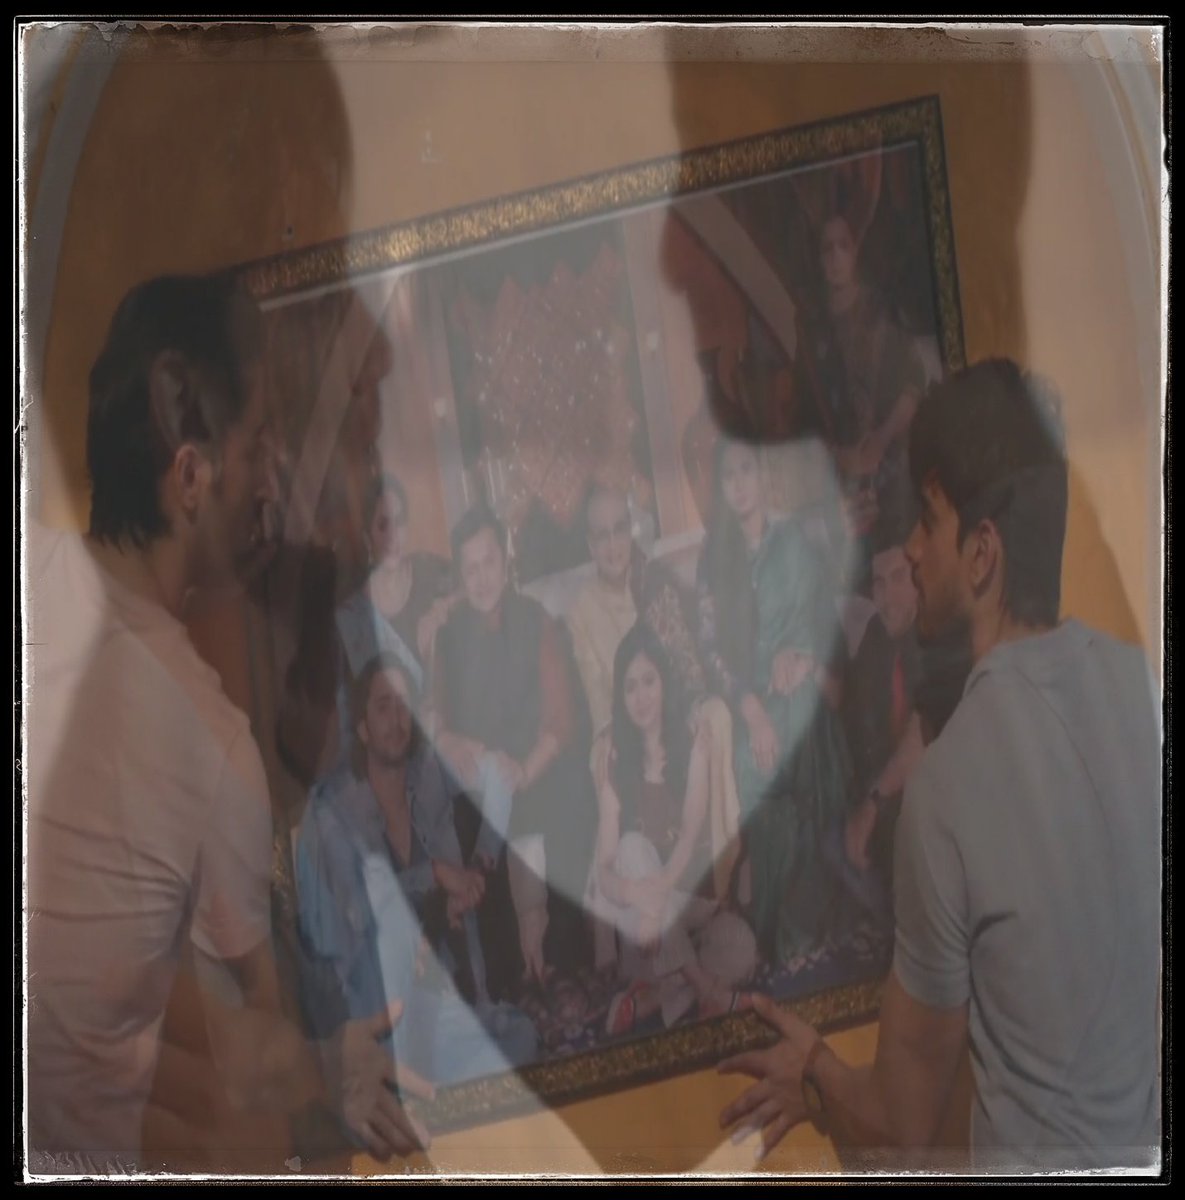 Though a tad bit dramatic, this was indeed a beautiful scene which symbolised the fact that both the brothers unitedly held the family together. Absence of either of them would affect the entire family  #ShaheerSheikh  #AvinashMishra  #RVbros